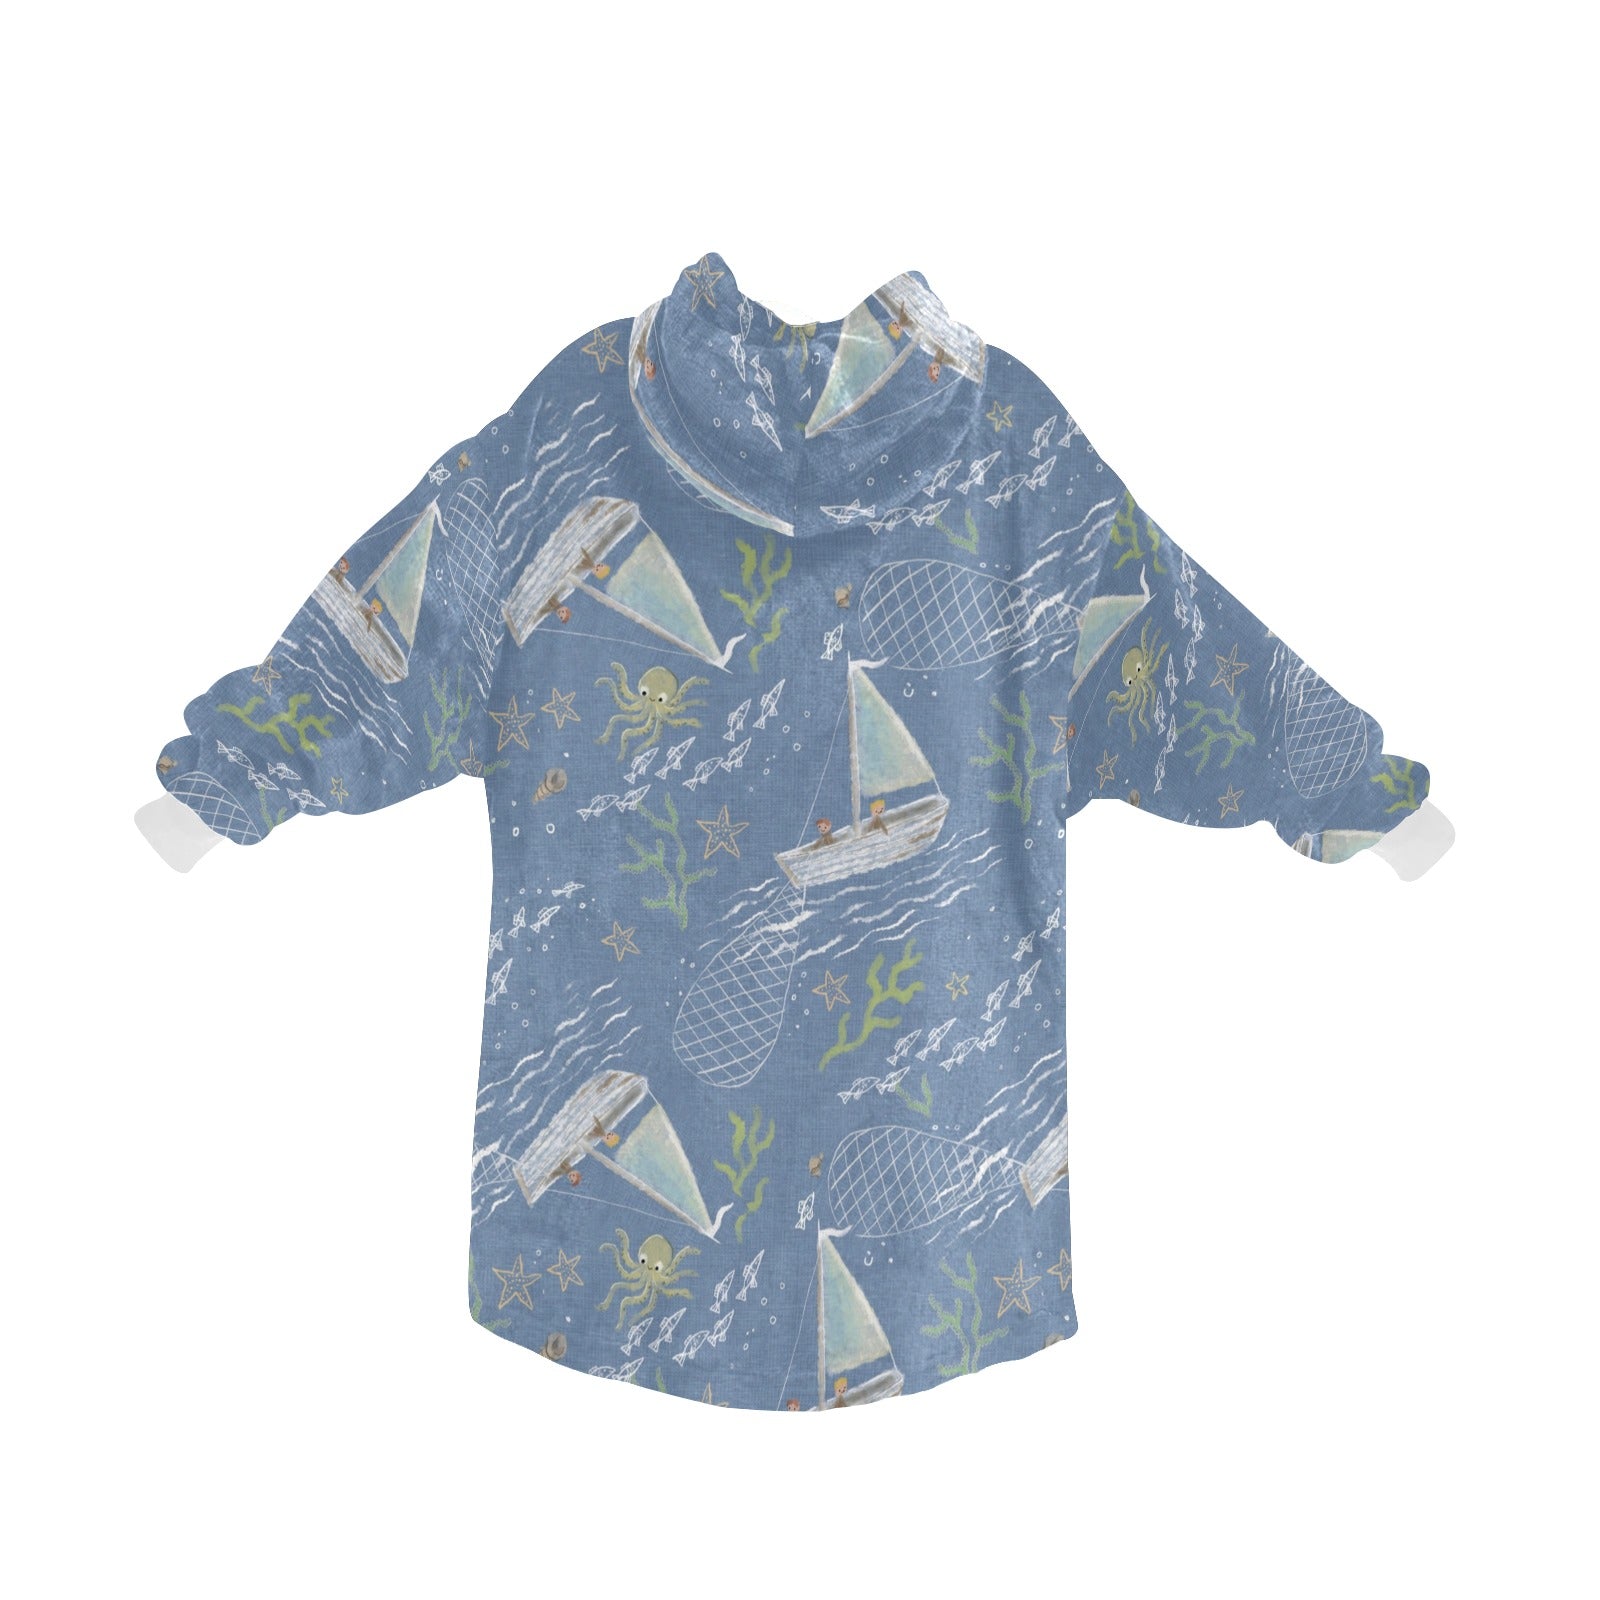 An Oodie-style hooded blanket with a charming blue boats print, designed to keep you warm and stylish on chilly days.